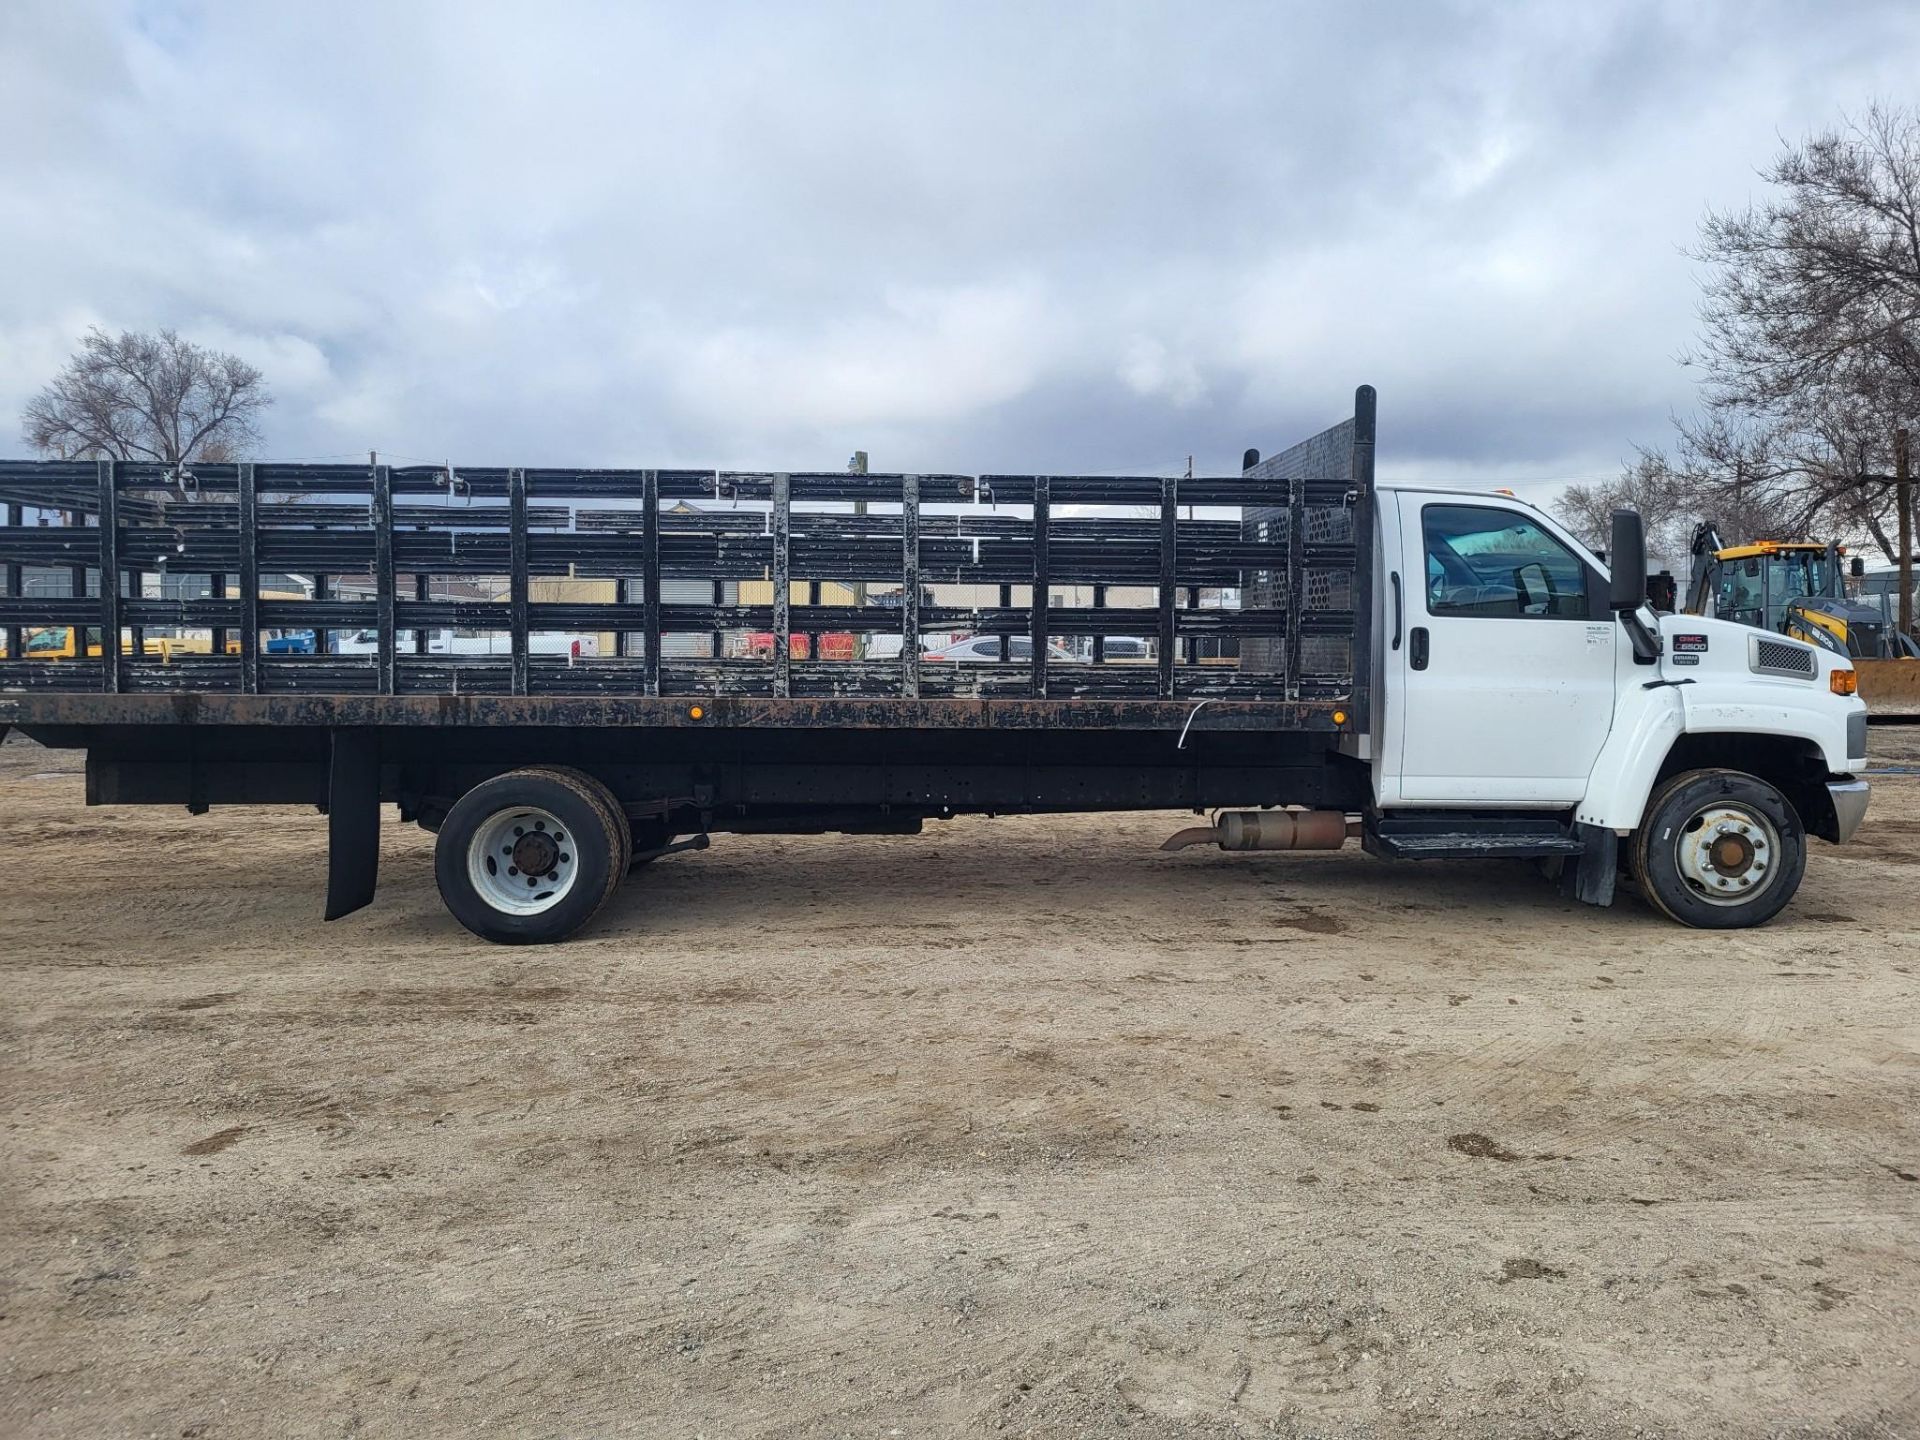 2004 GMC TOPKICK C6500 22' STAKE BED TRUCK - Image 4 of 17